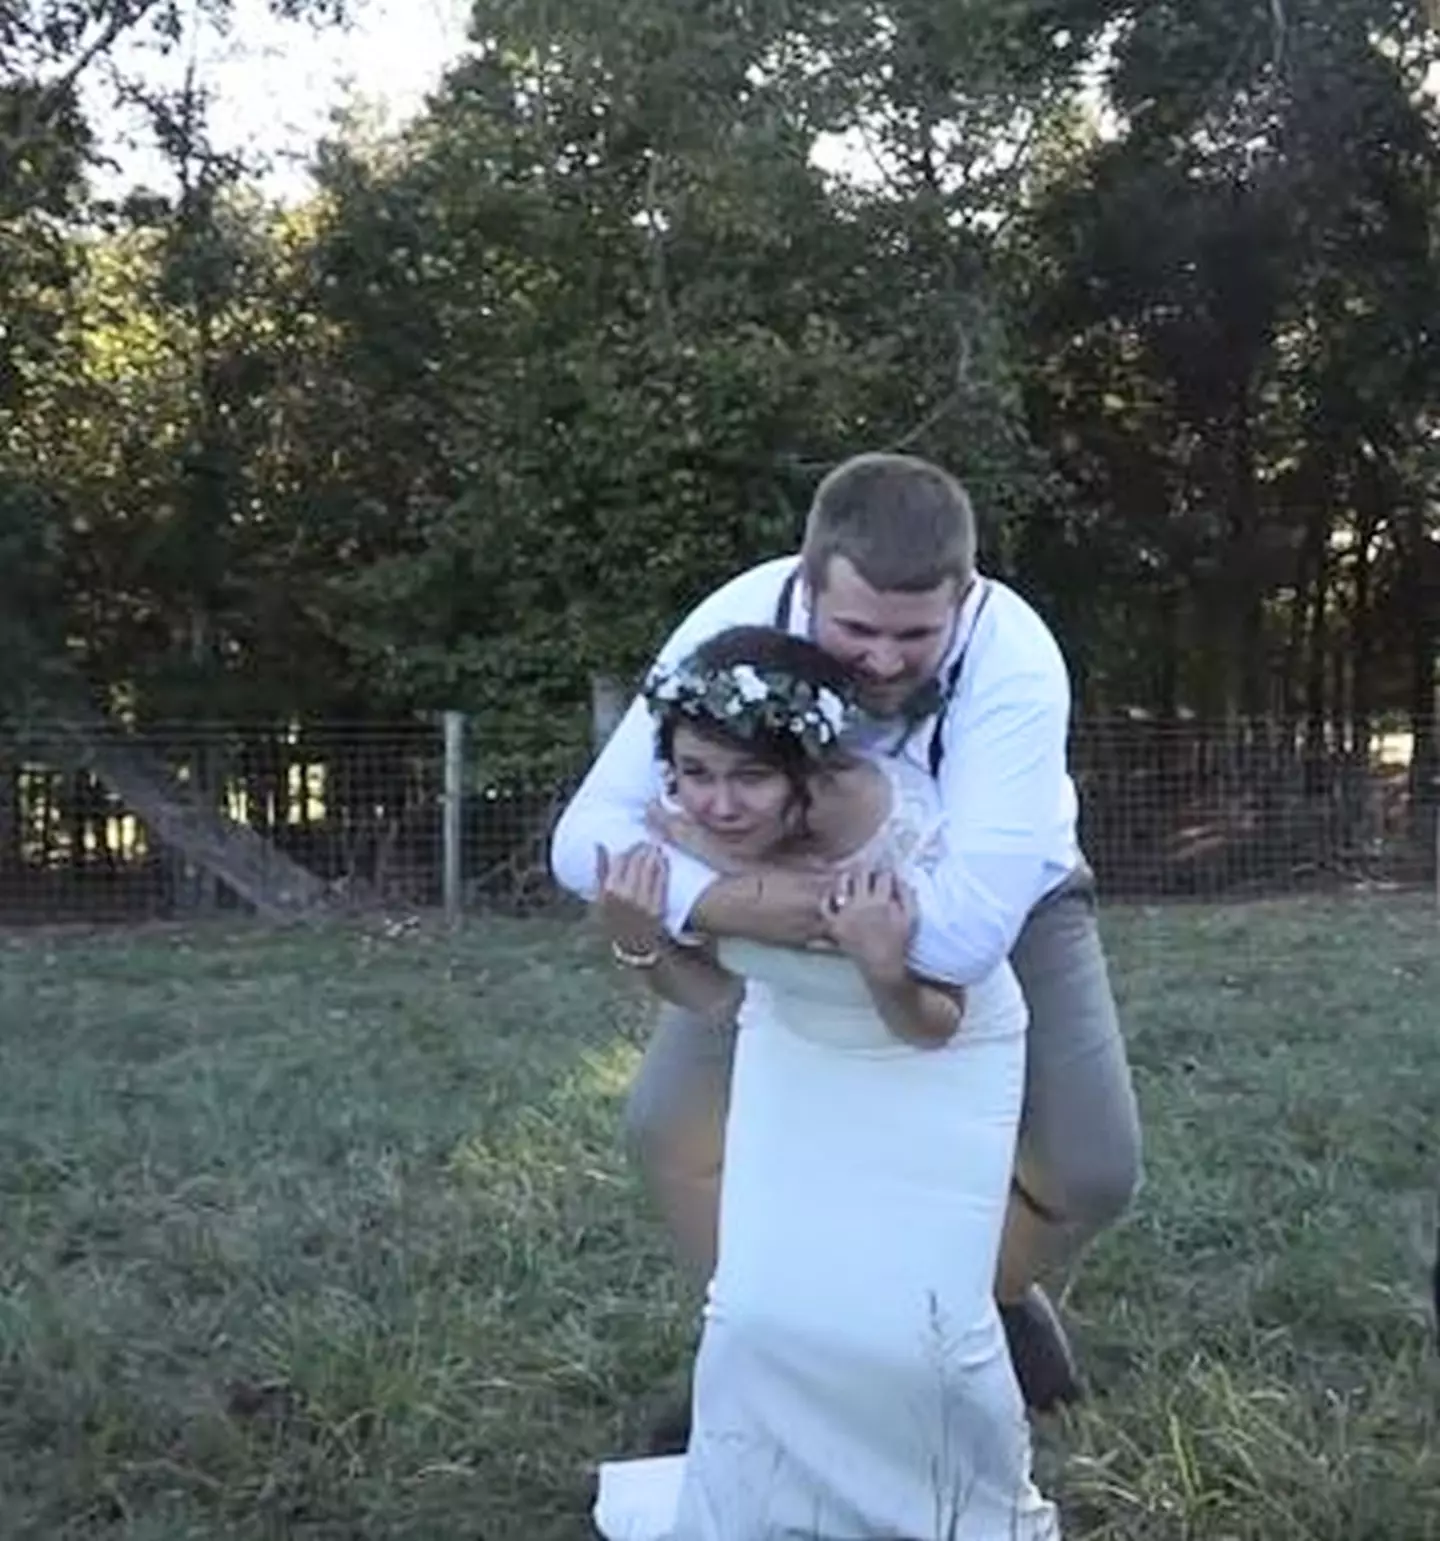 The happy couple were taking wedding photos after tying the knot, then the bride's ankle snapped. (Kennedy News and Media)